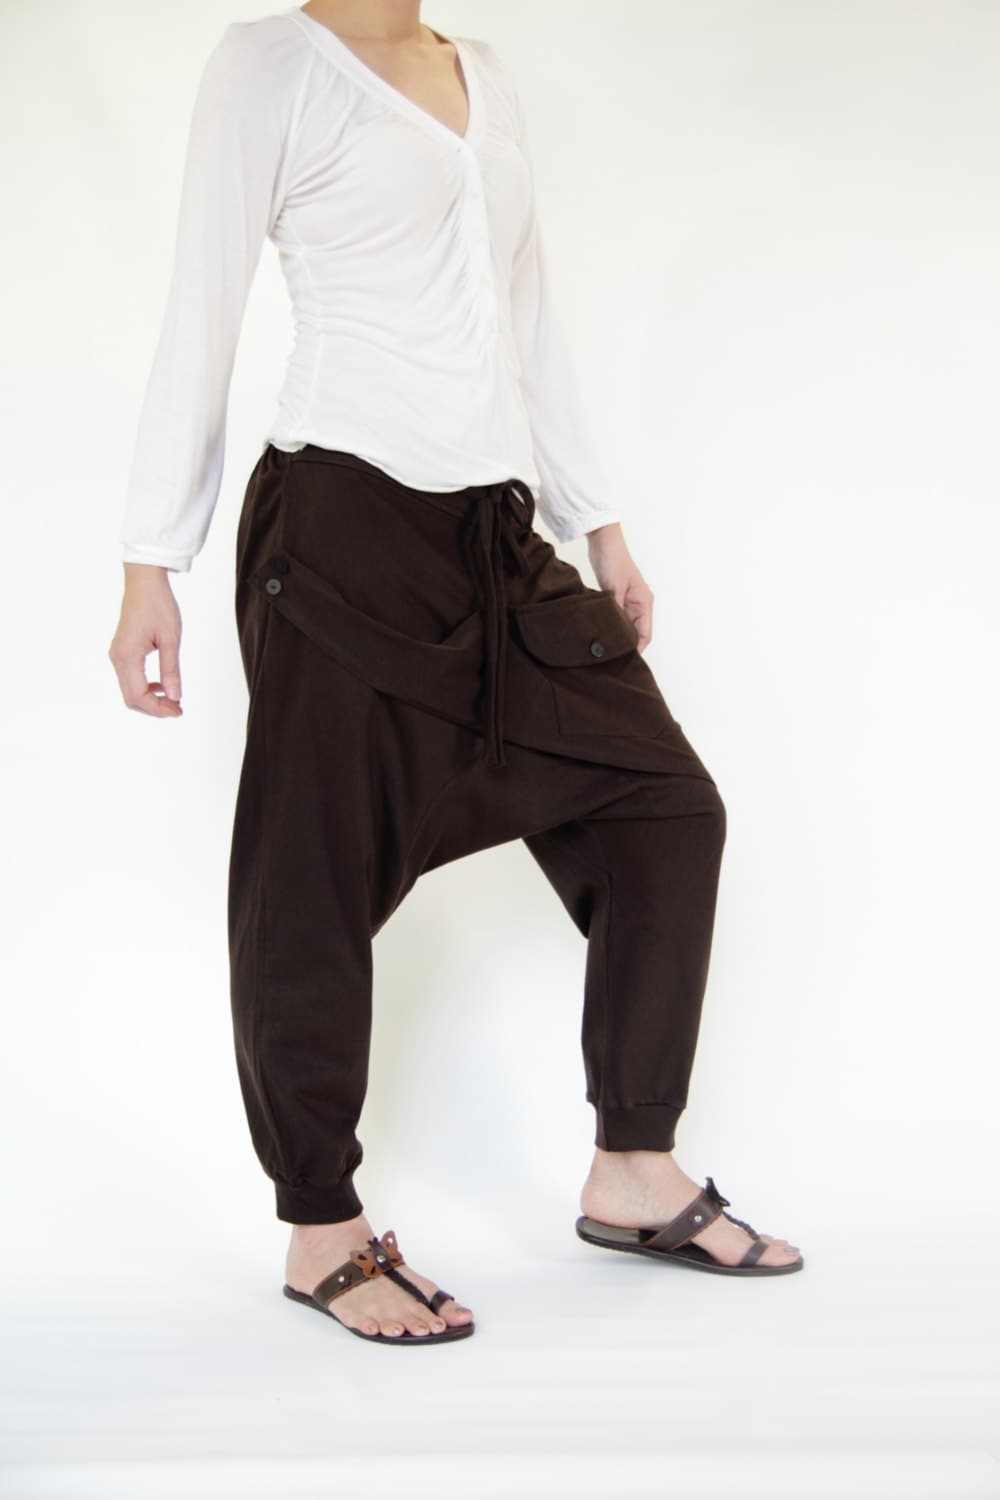 Ninja pants new design brown cottonunisex by smileclothing on Etsy